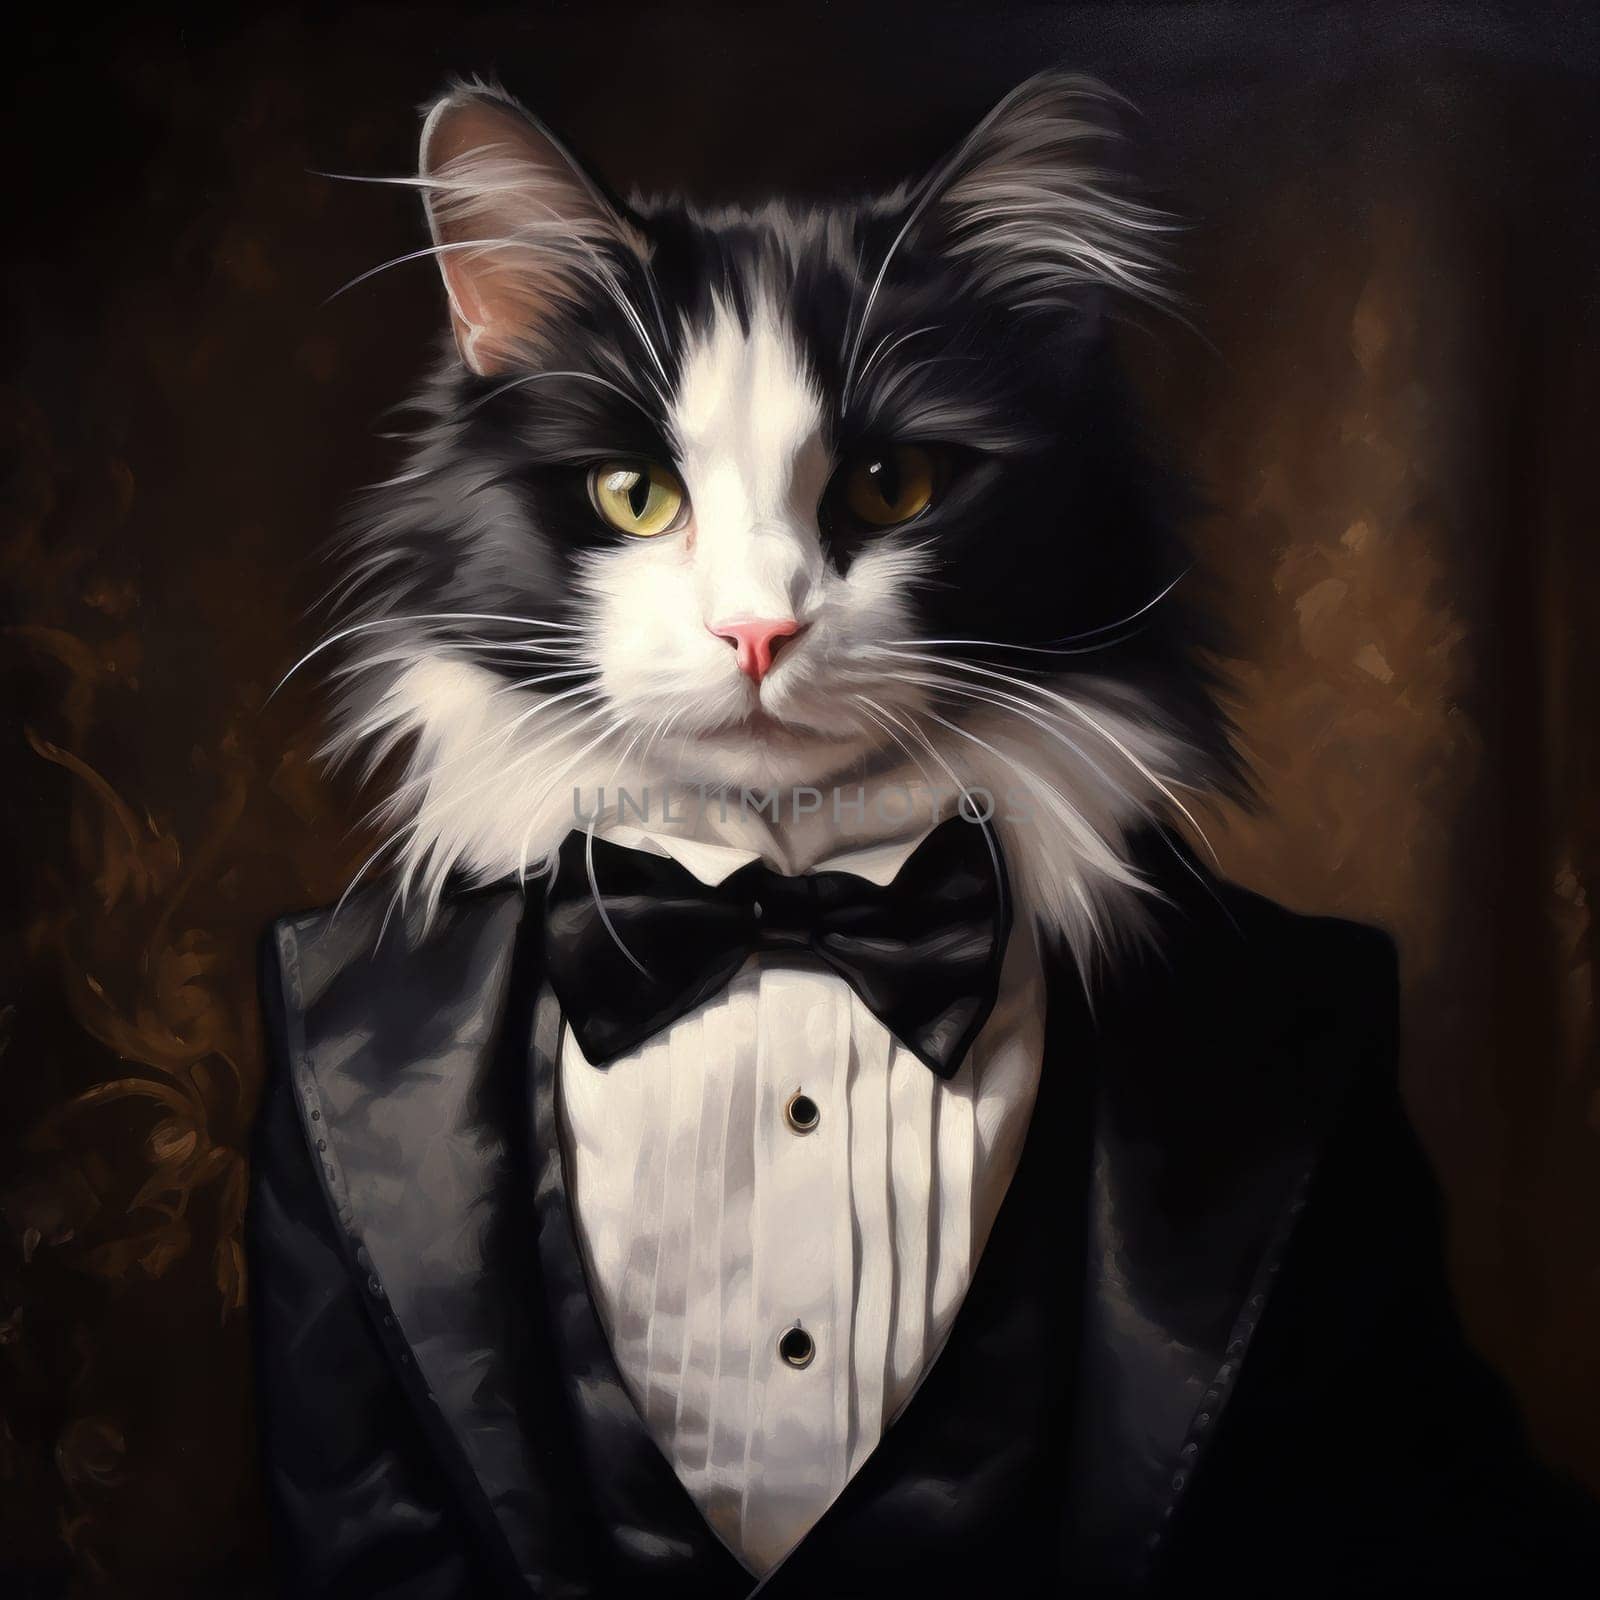 A black and white cat wearing a tuxedo